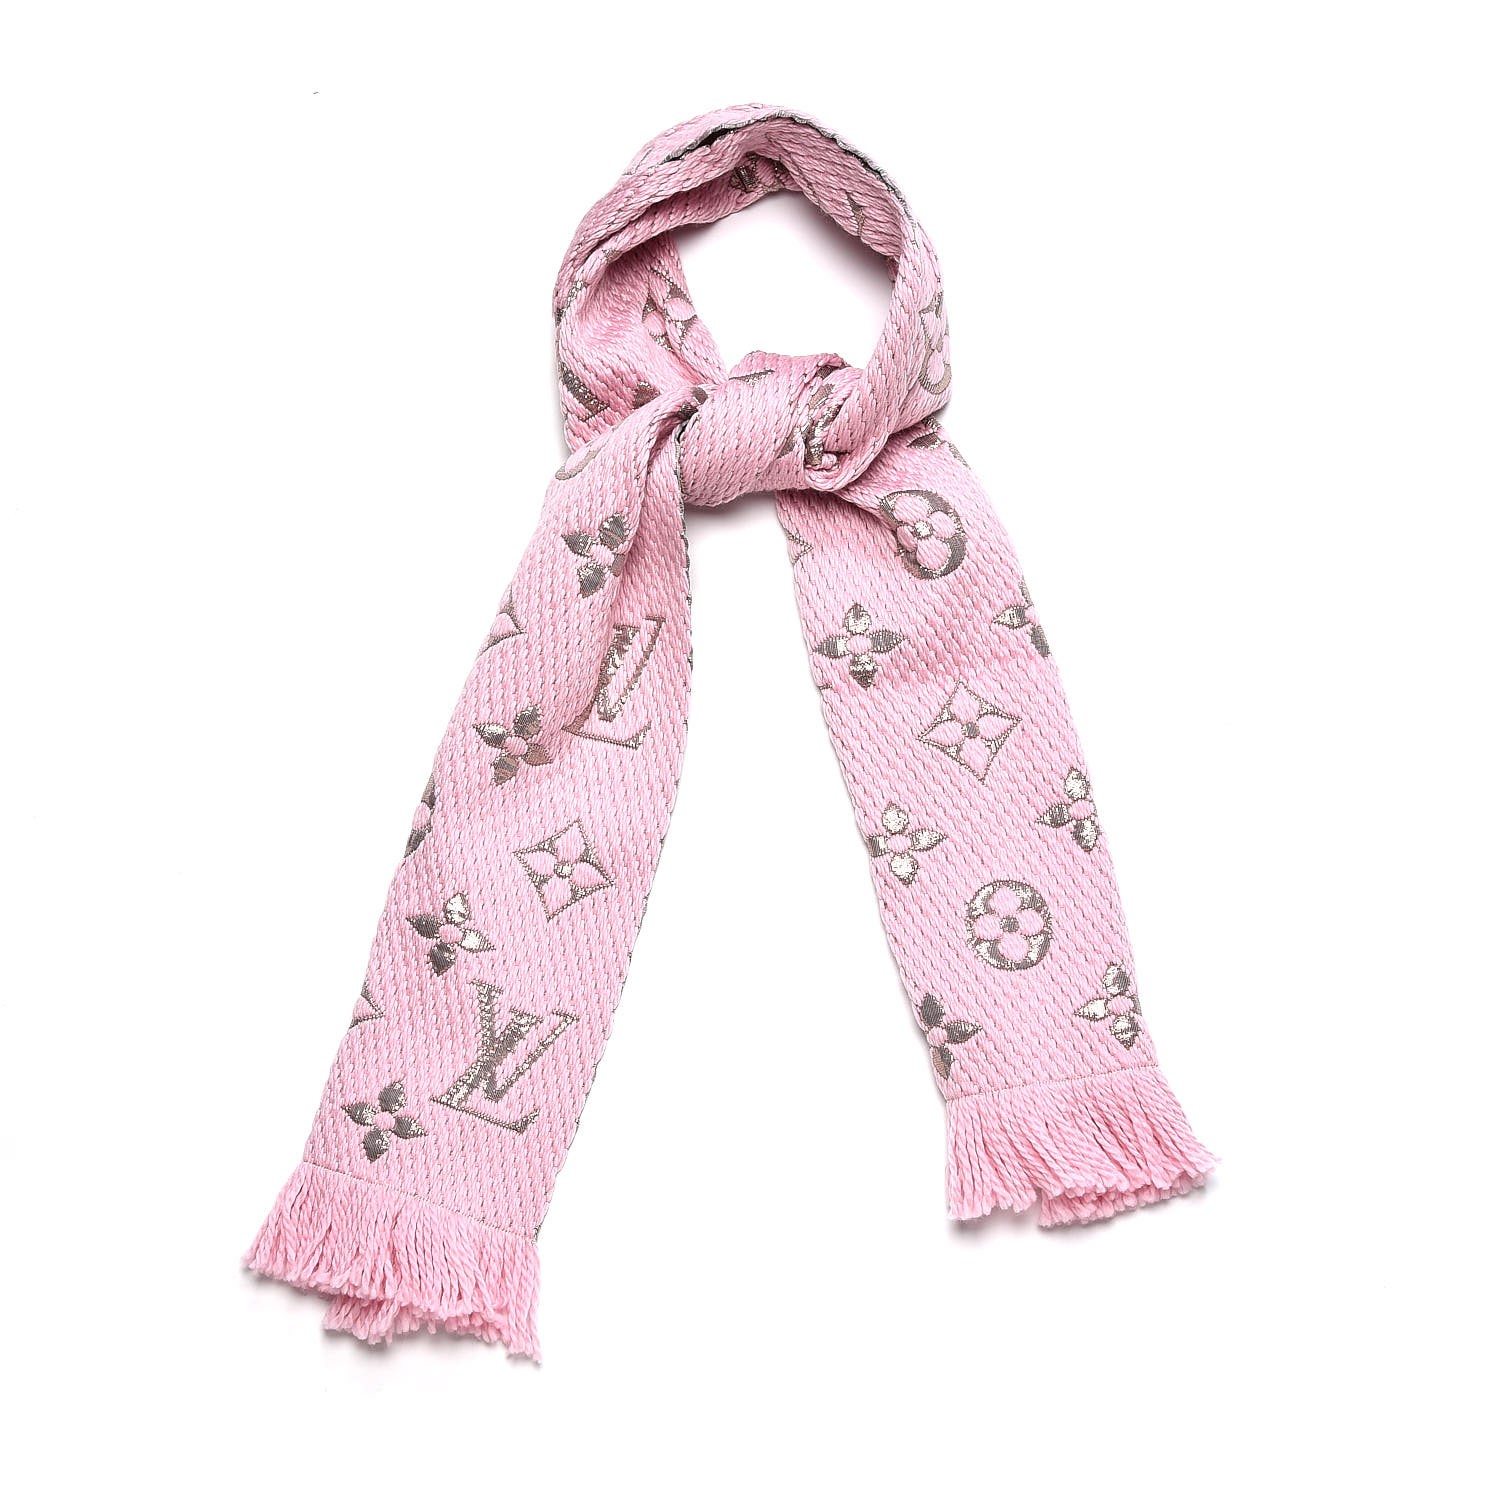 Authenticated Used Louis Vuitton twilly scarf muffler LOUIS